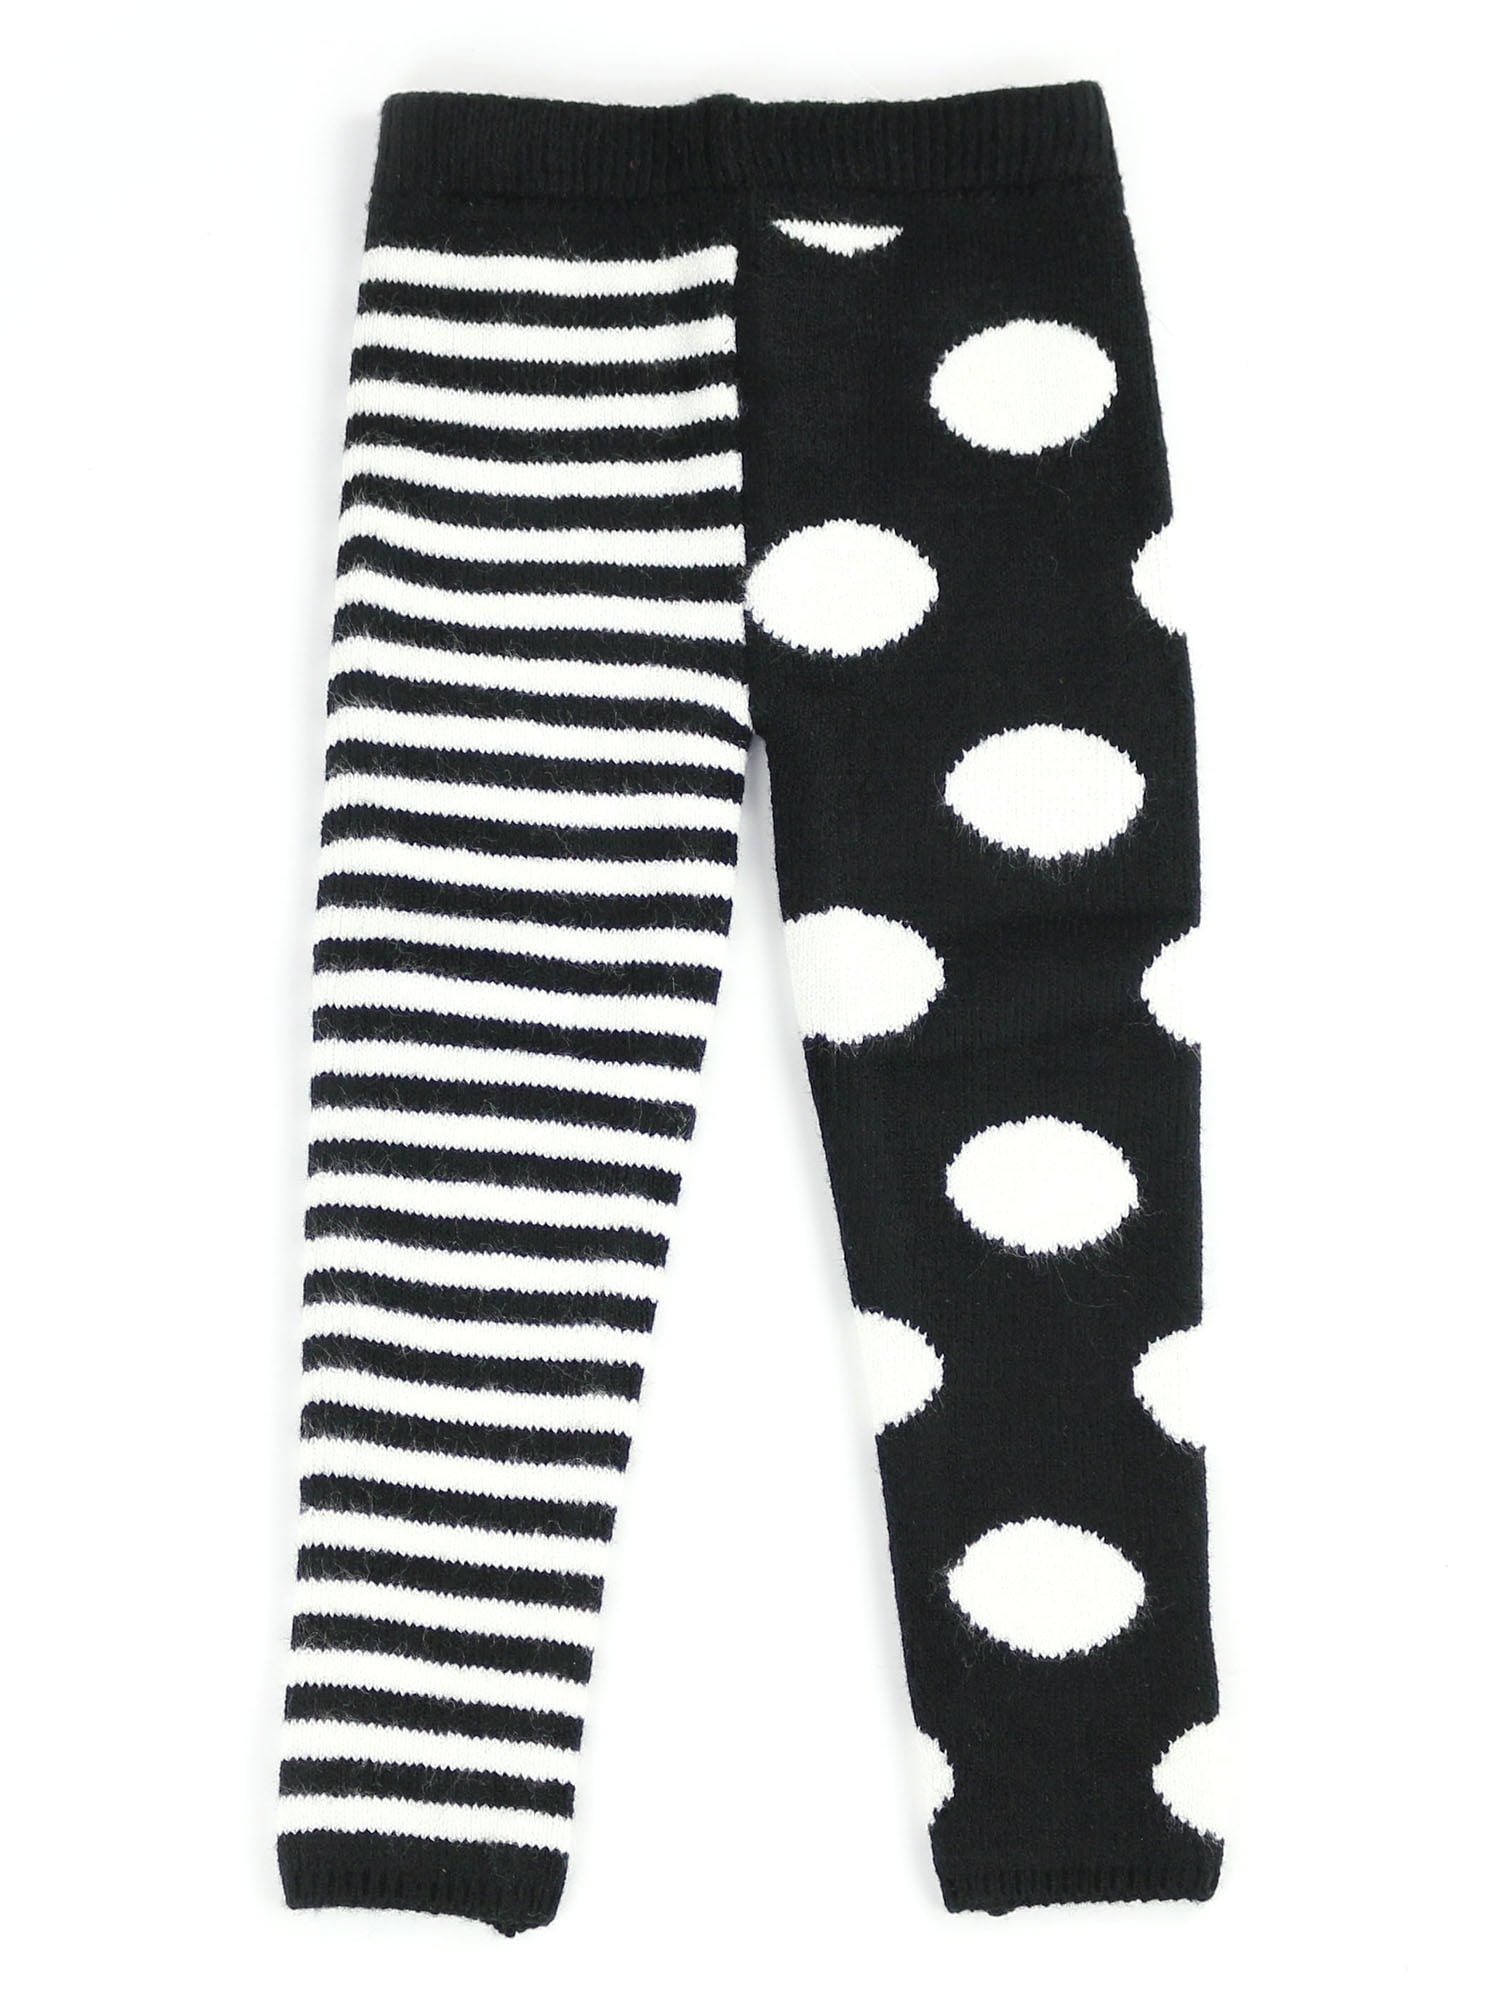 Maria Elena Infants /& Toddlers Winter-Thick Thermal Leggings Mix Match Polka Dot /& Stripe Kelly /& Katie 12M-4T